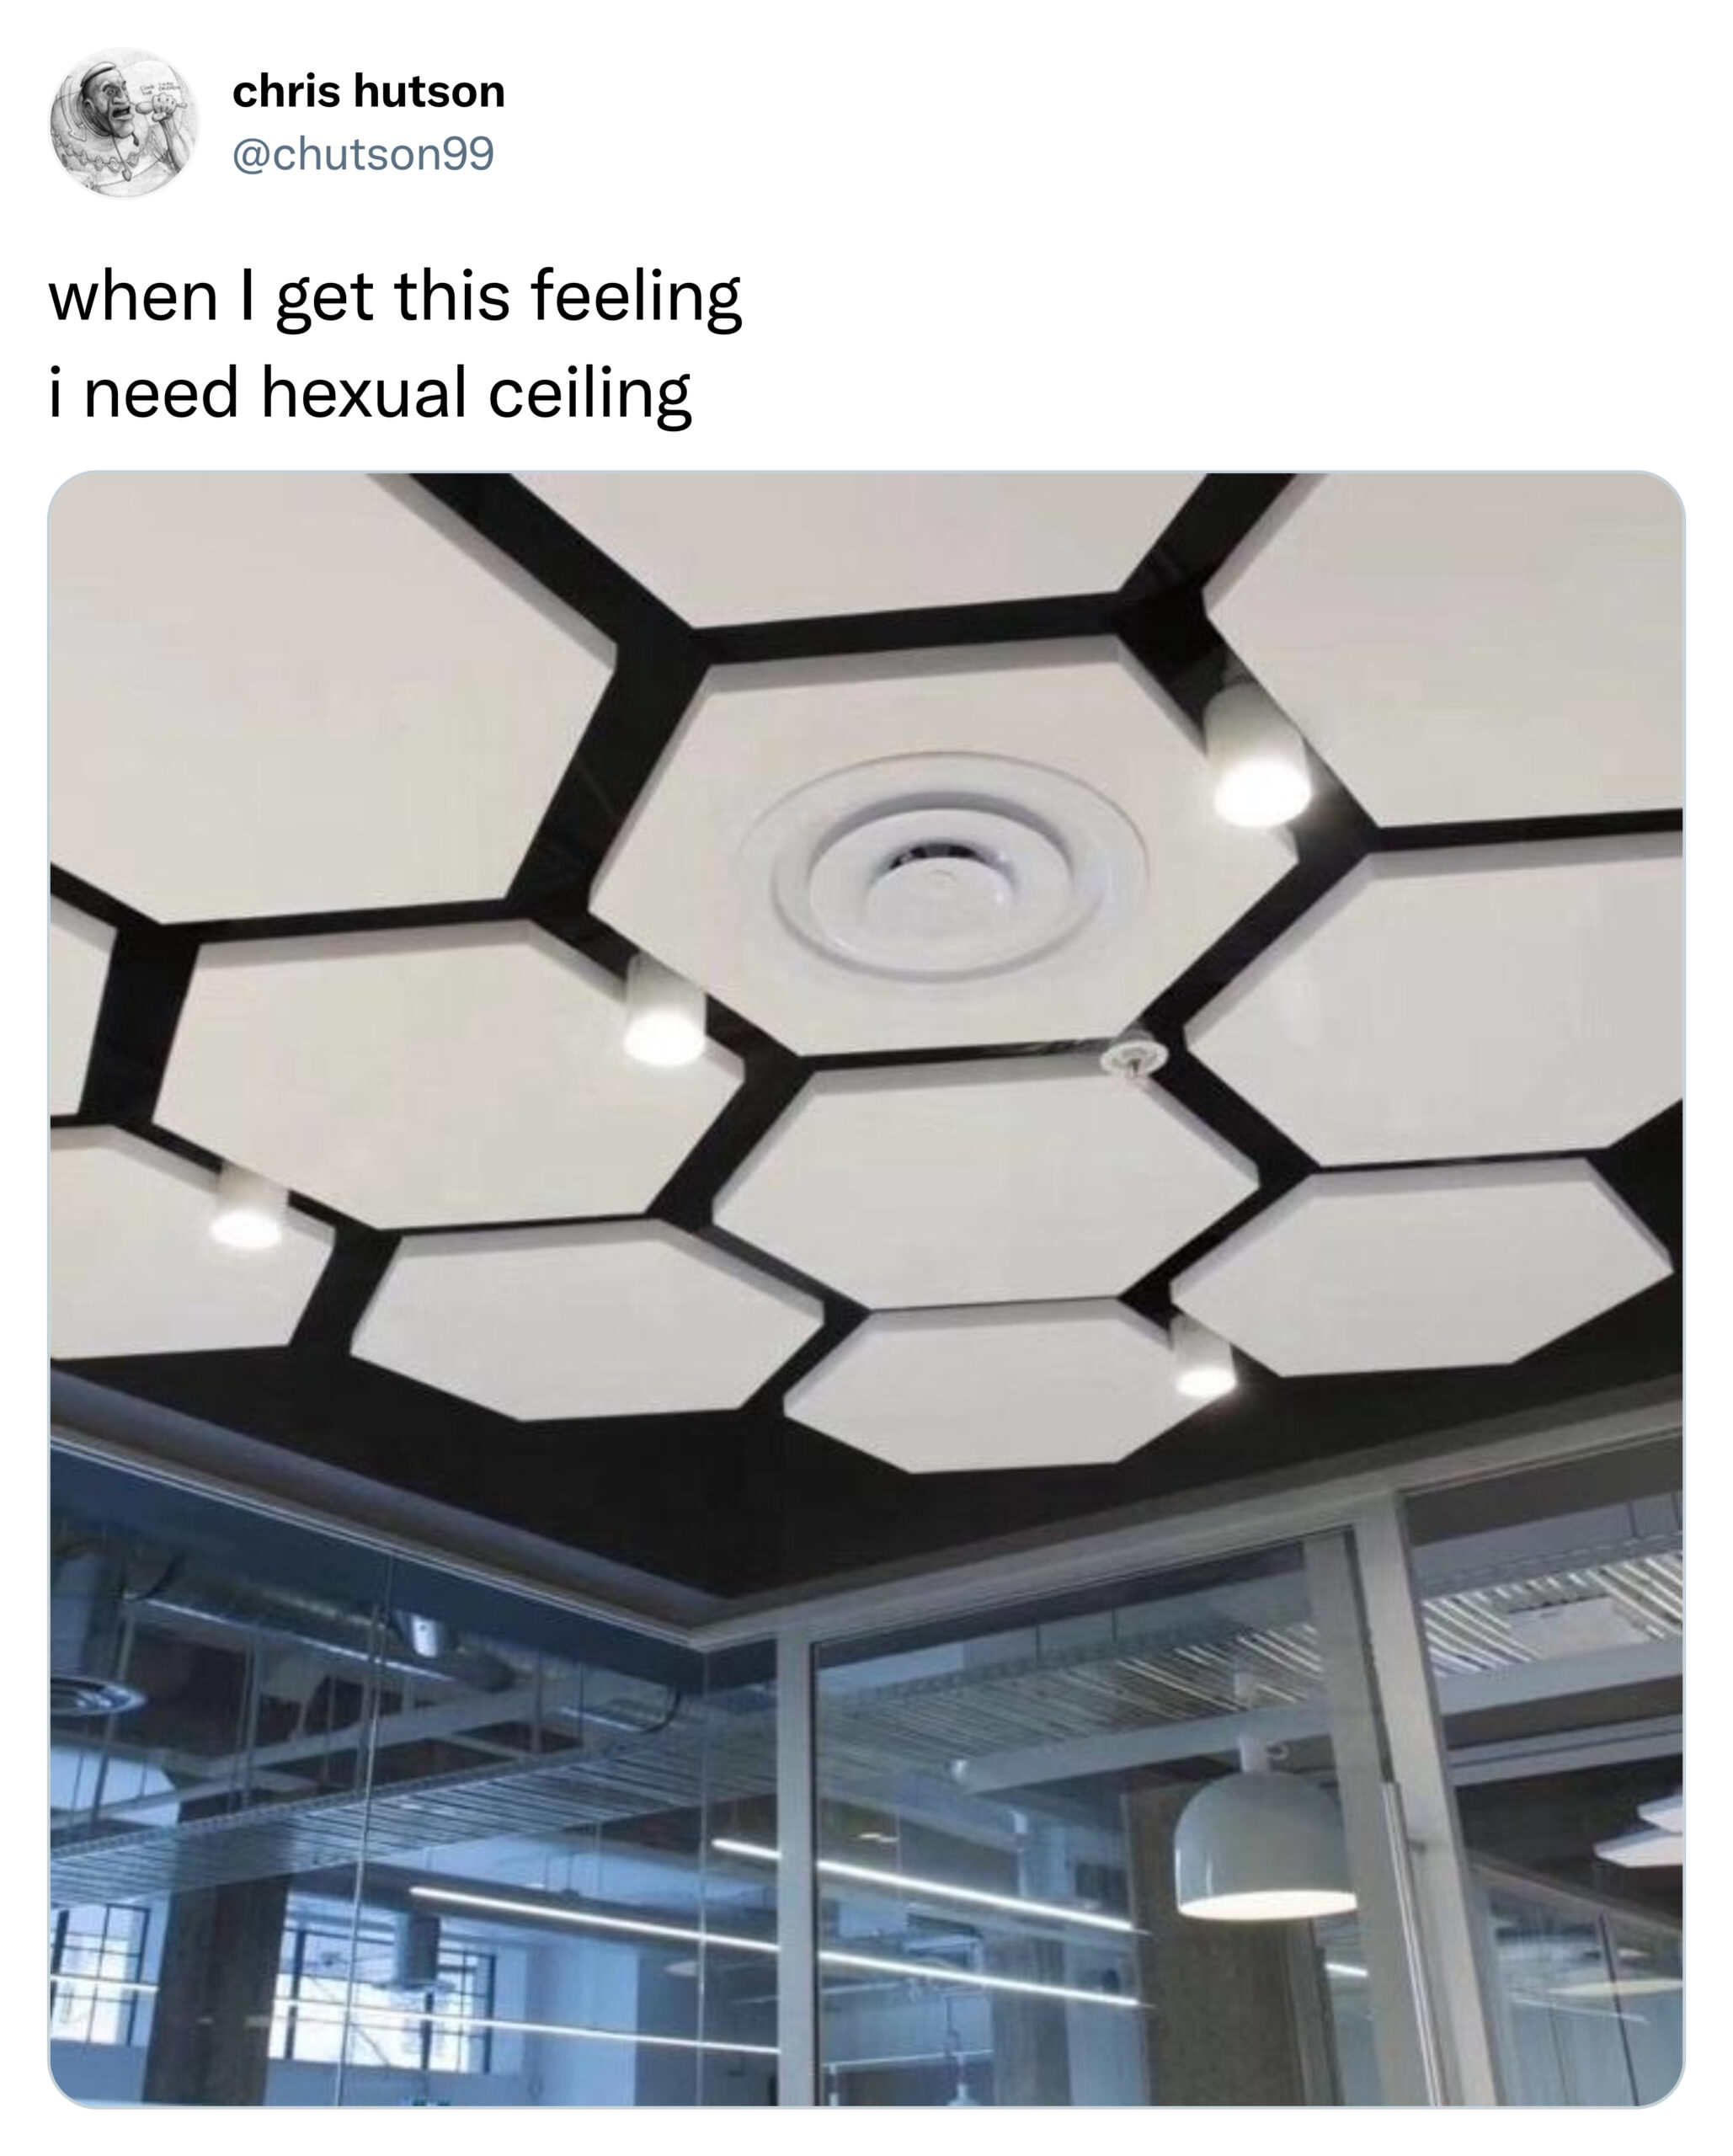 funny tweets and memes -  hexagon acoustic ceiling tiles - 122 chris hutson when I get this feeling i need hexual ceiling